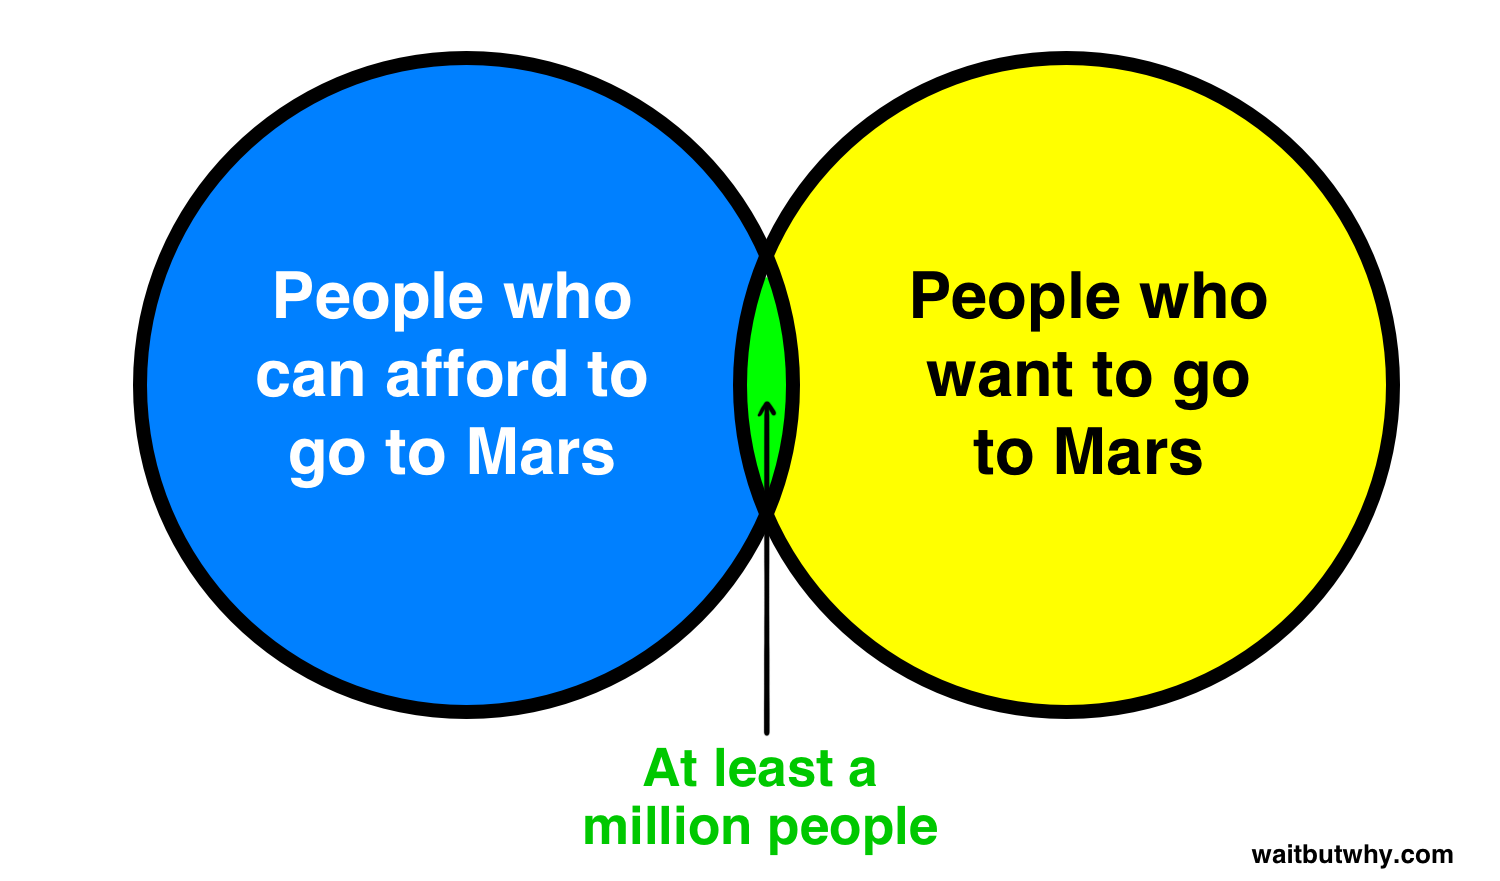 Blue circle: People who can afford to go to Mars. Yellow circle: People who want to go to Mars. Green intersection: At least a million people